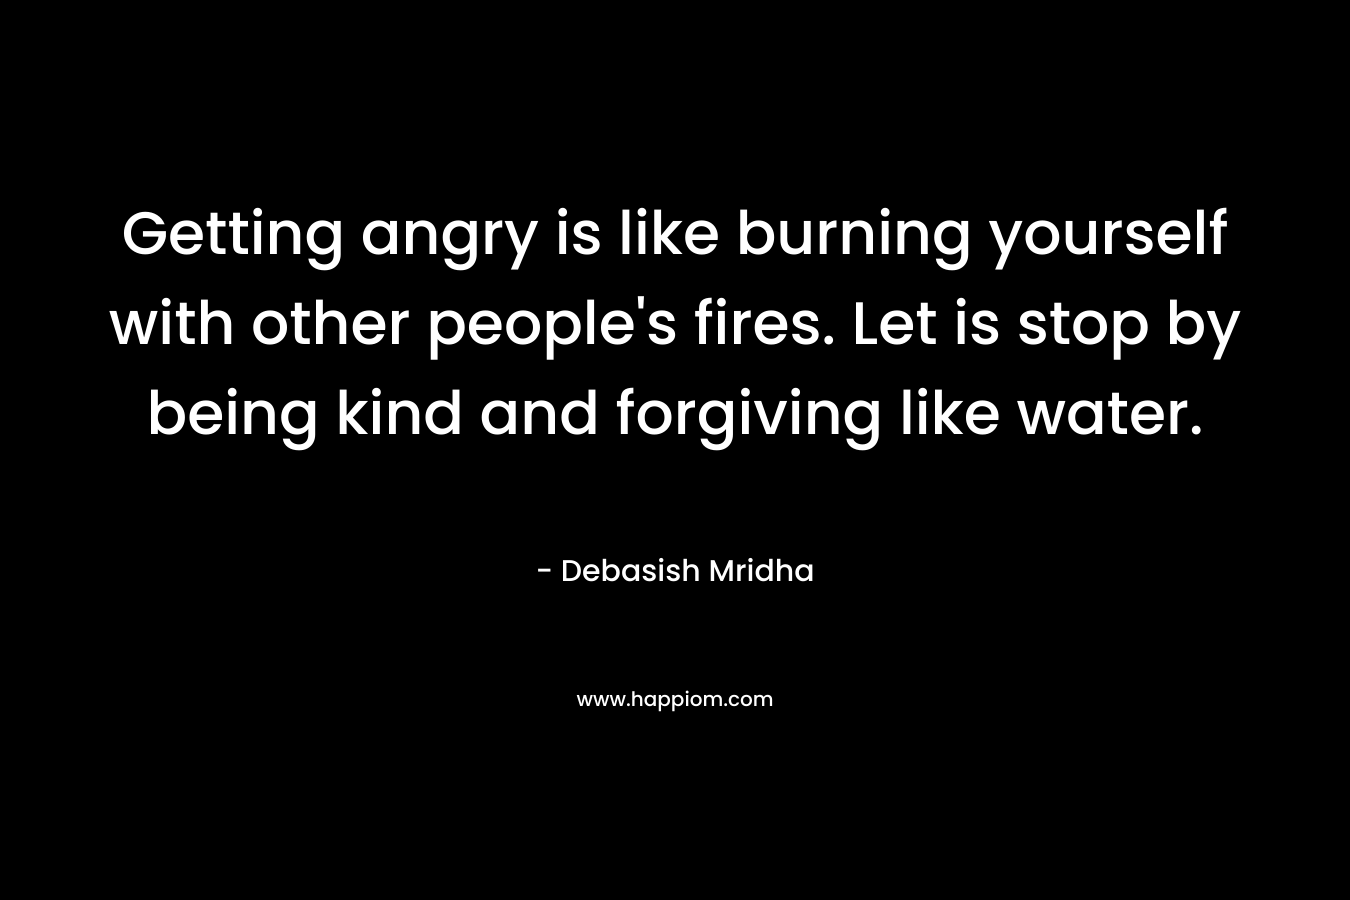 Getting angry is like burning yourself with other people's fires. Let is stop by being kind and forgiving like water.